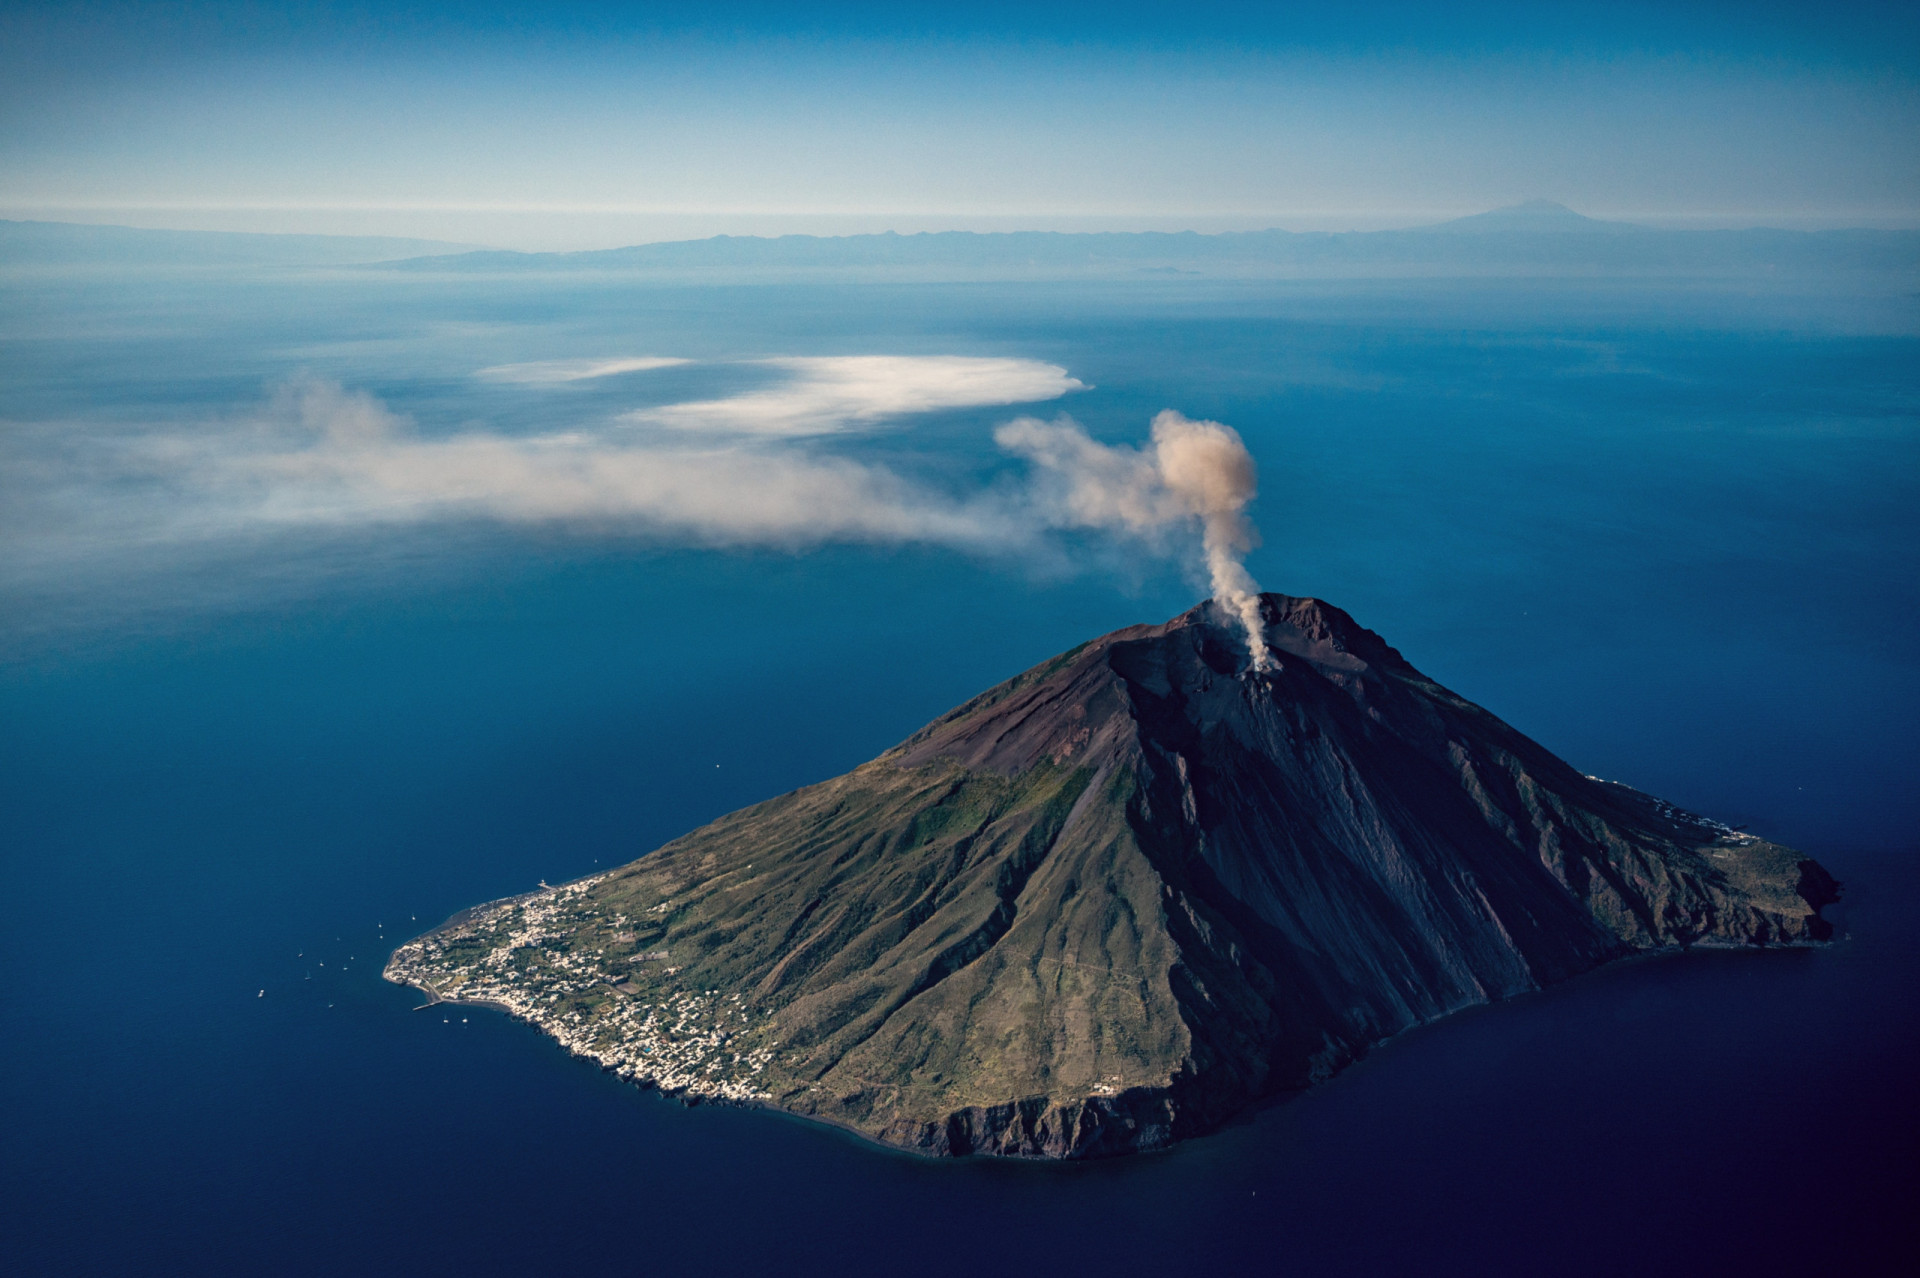 <p>Mount Stromboli is one of the most active volcanoes in the world. An island in the Tyrrhenian Sea, off the north coast of Sicily, Stromboli has been in almost continuous eruption for the past 2,000–5,000 years. The last eruption occurred on August 28, 2019.</p><p><a href="https://www.msn.com/en-us/community/channel/vid-7xx8mnucu55yw63we9va2gwr7uihbxwc68fxqp25x6tg4ftibpra?cvid=94631541bc0f4f89bfd59158d696ad7e">Follow us and access great exclusive content every day</a></p>